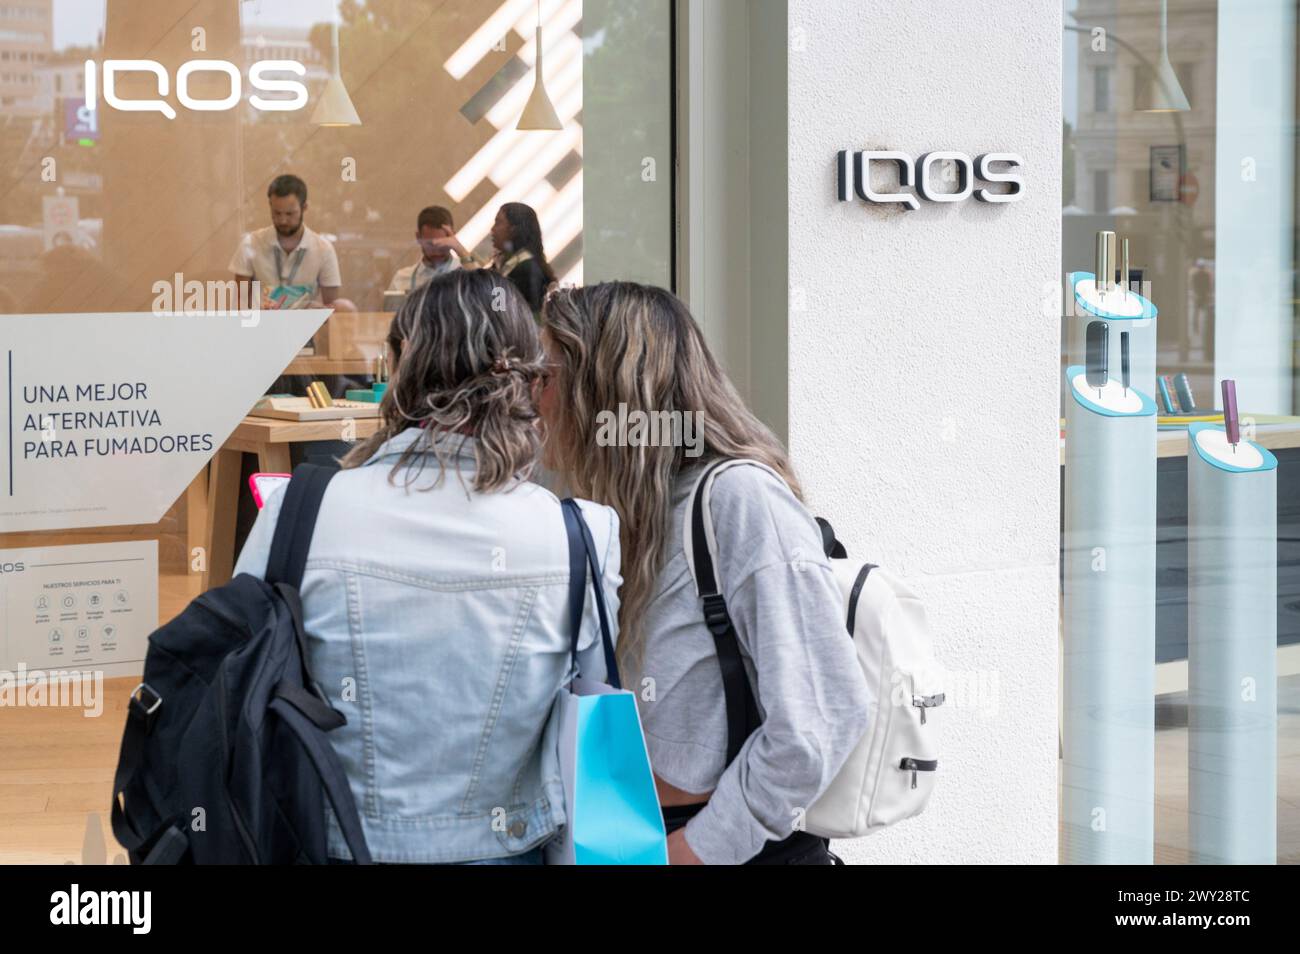 Shoppers window shop at the heated tobacco and electronic cigarette products brand and manufactured by Philip Morris International (PMI), IQOS, in Spain. Stock Photo